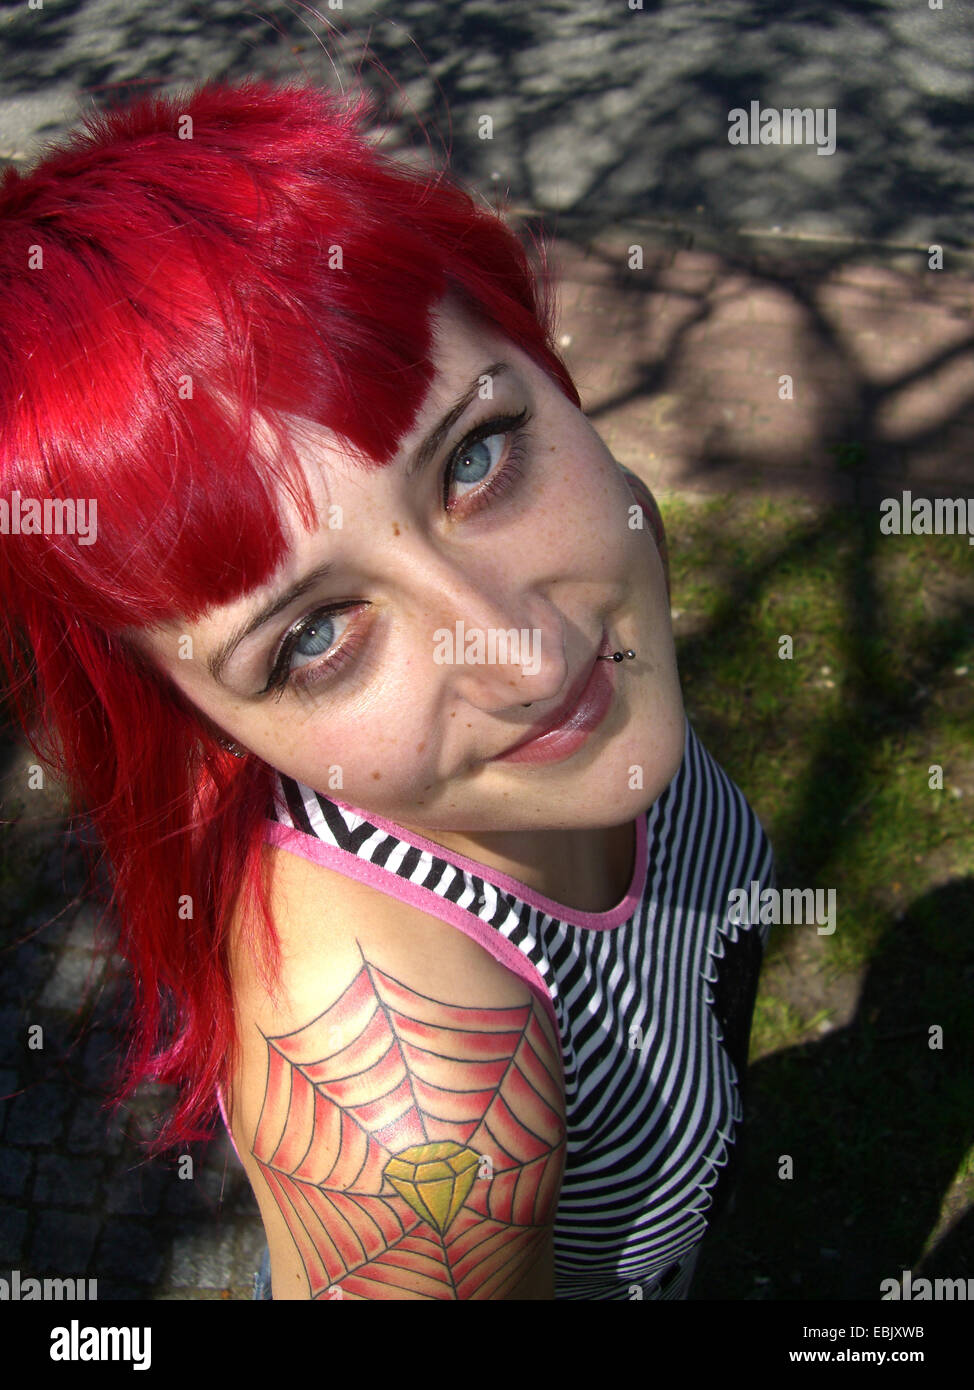 young tattooed redheaded woman looking up to the camera Stock Photo